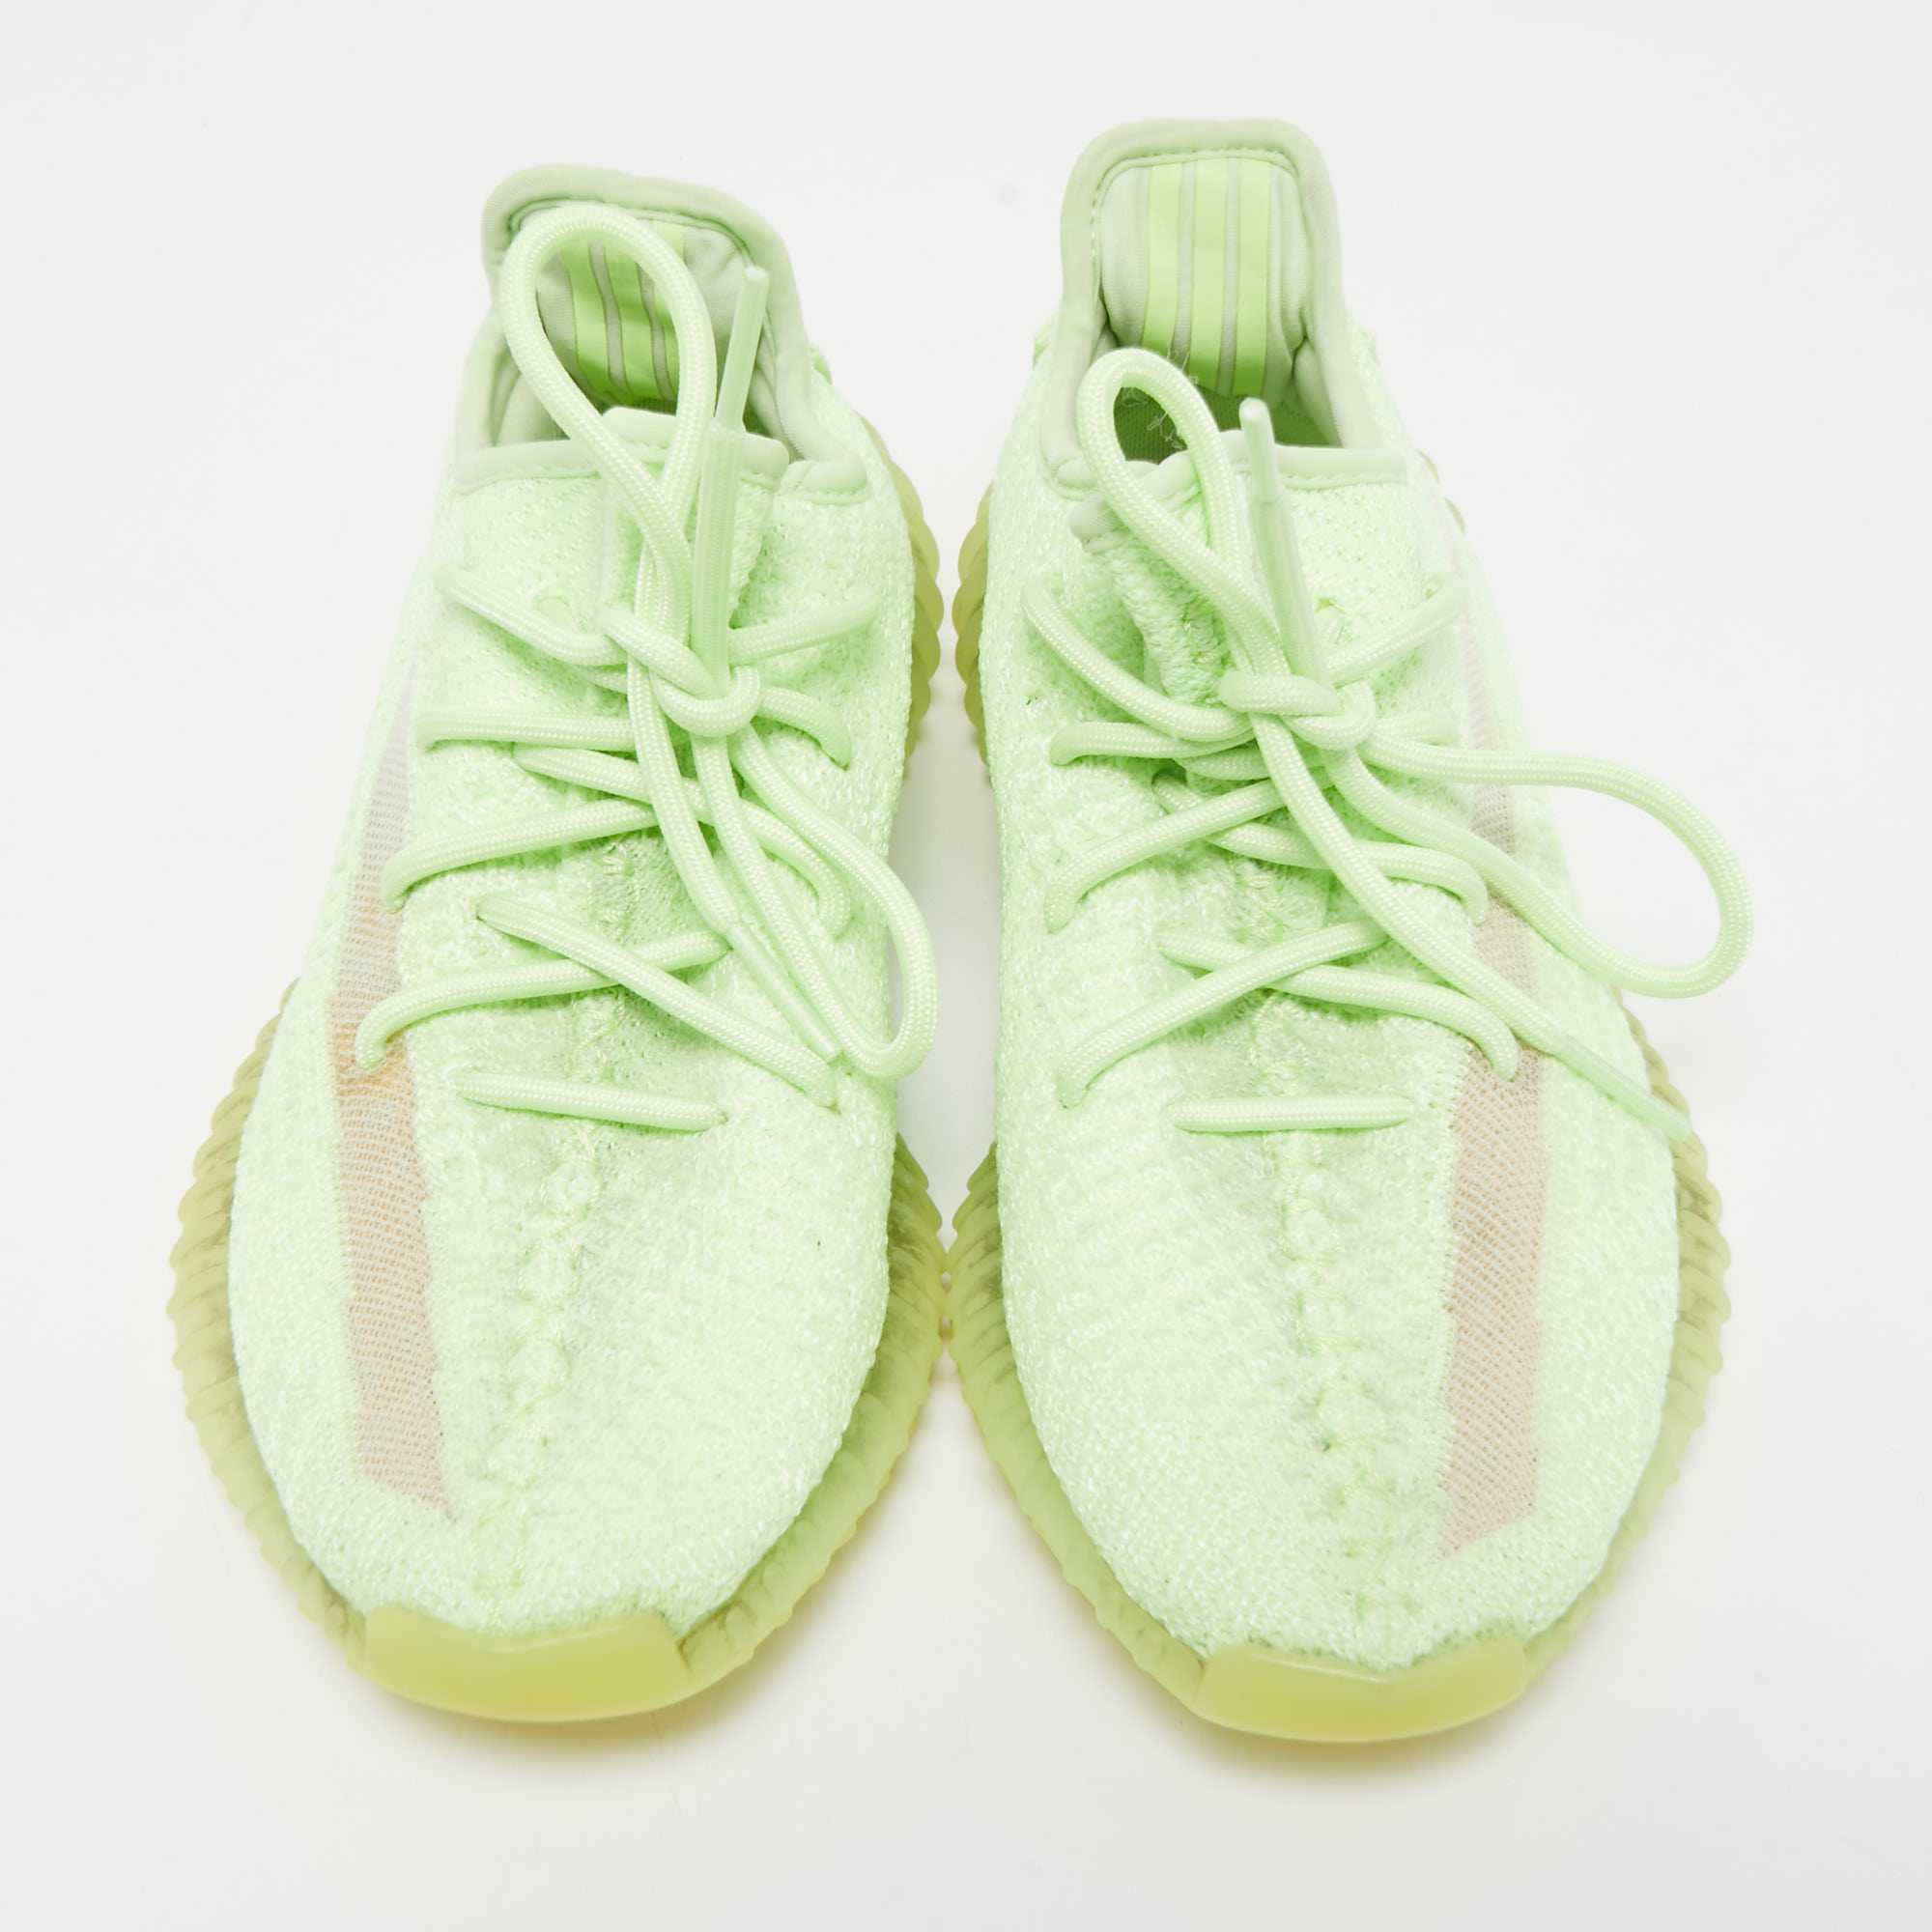 Yeezy X Adidas Neon Green Knit Fabric Boost 350 V2 Glow Sneakers Size 40